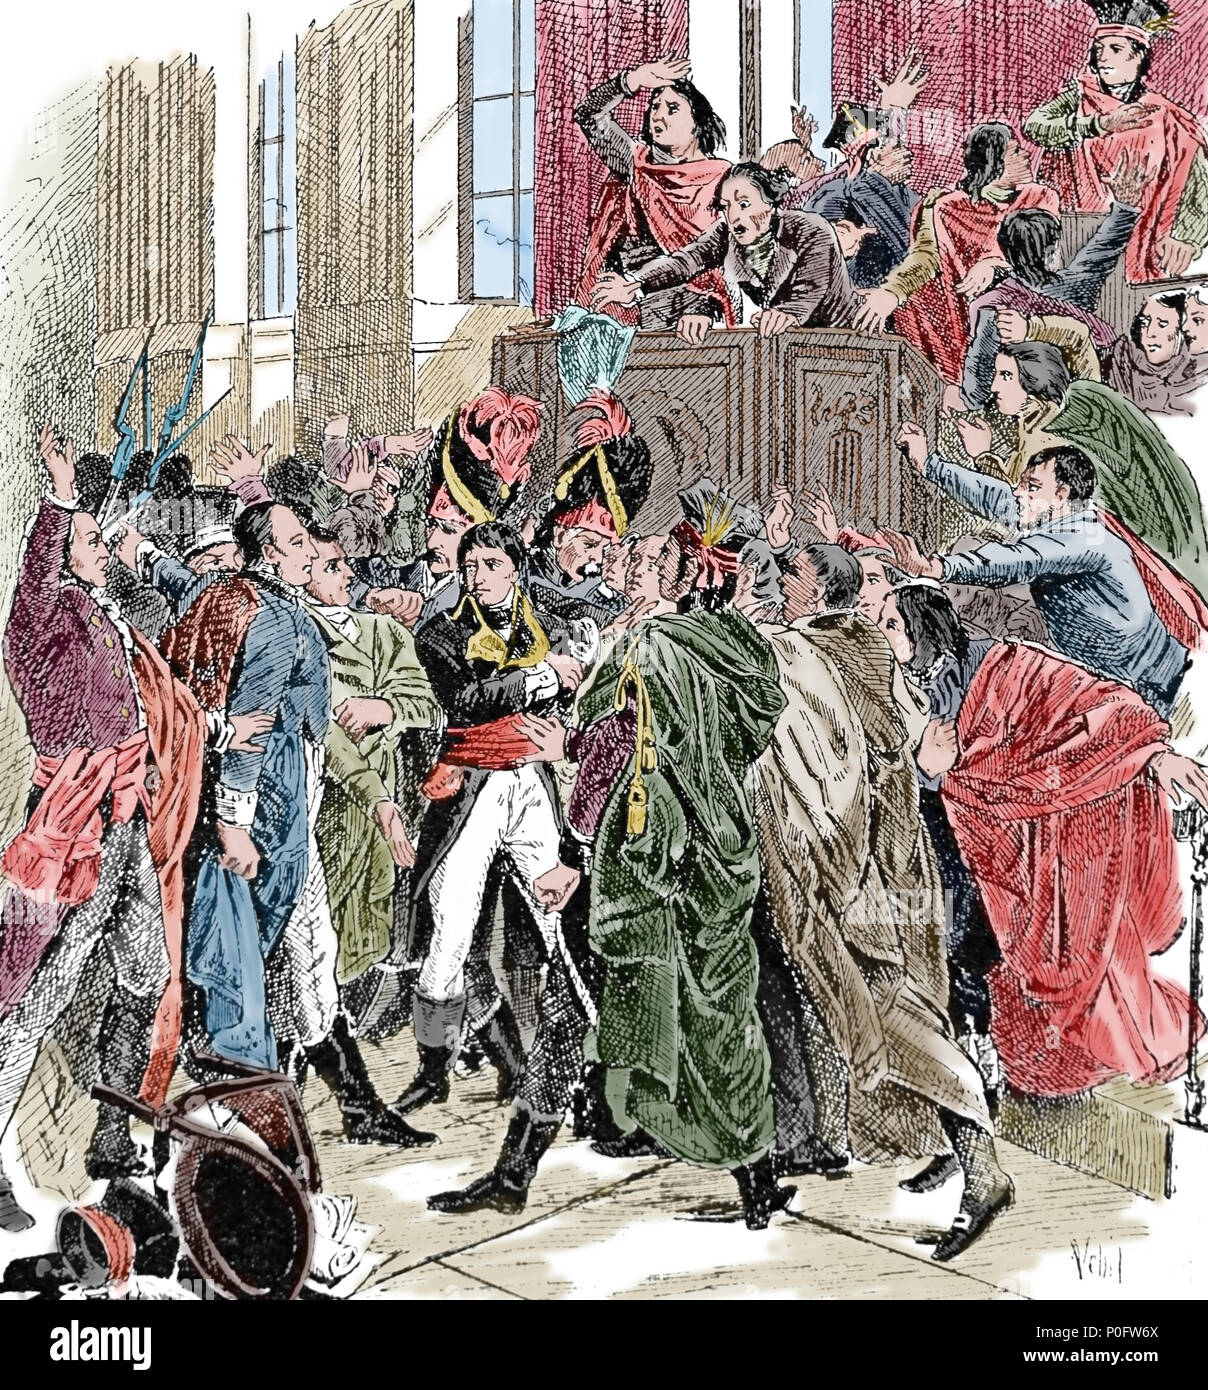 General Bonaparte Surrounded by members of the Council of Five Hundred, during the Coup of 18 Brumaire. Engraving, 19th cent. Stock Photo